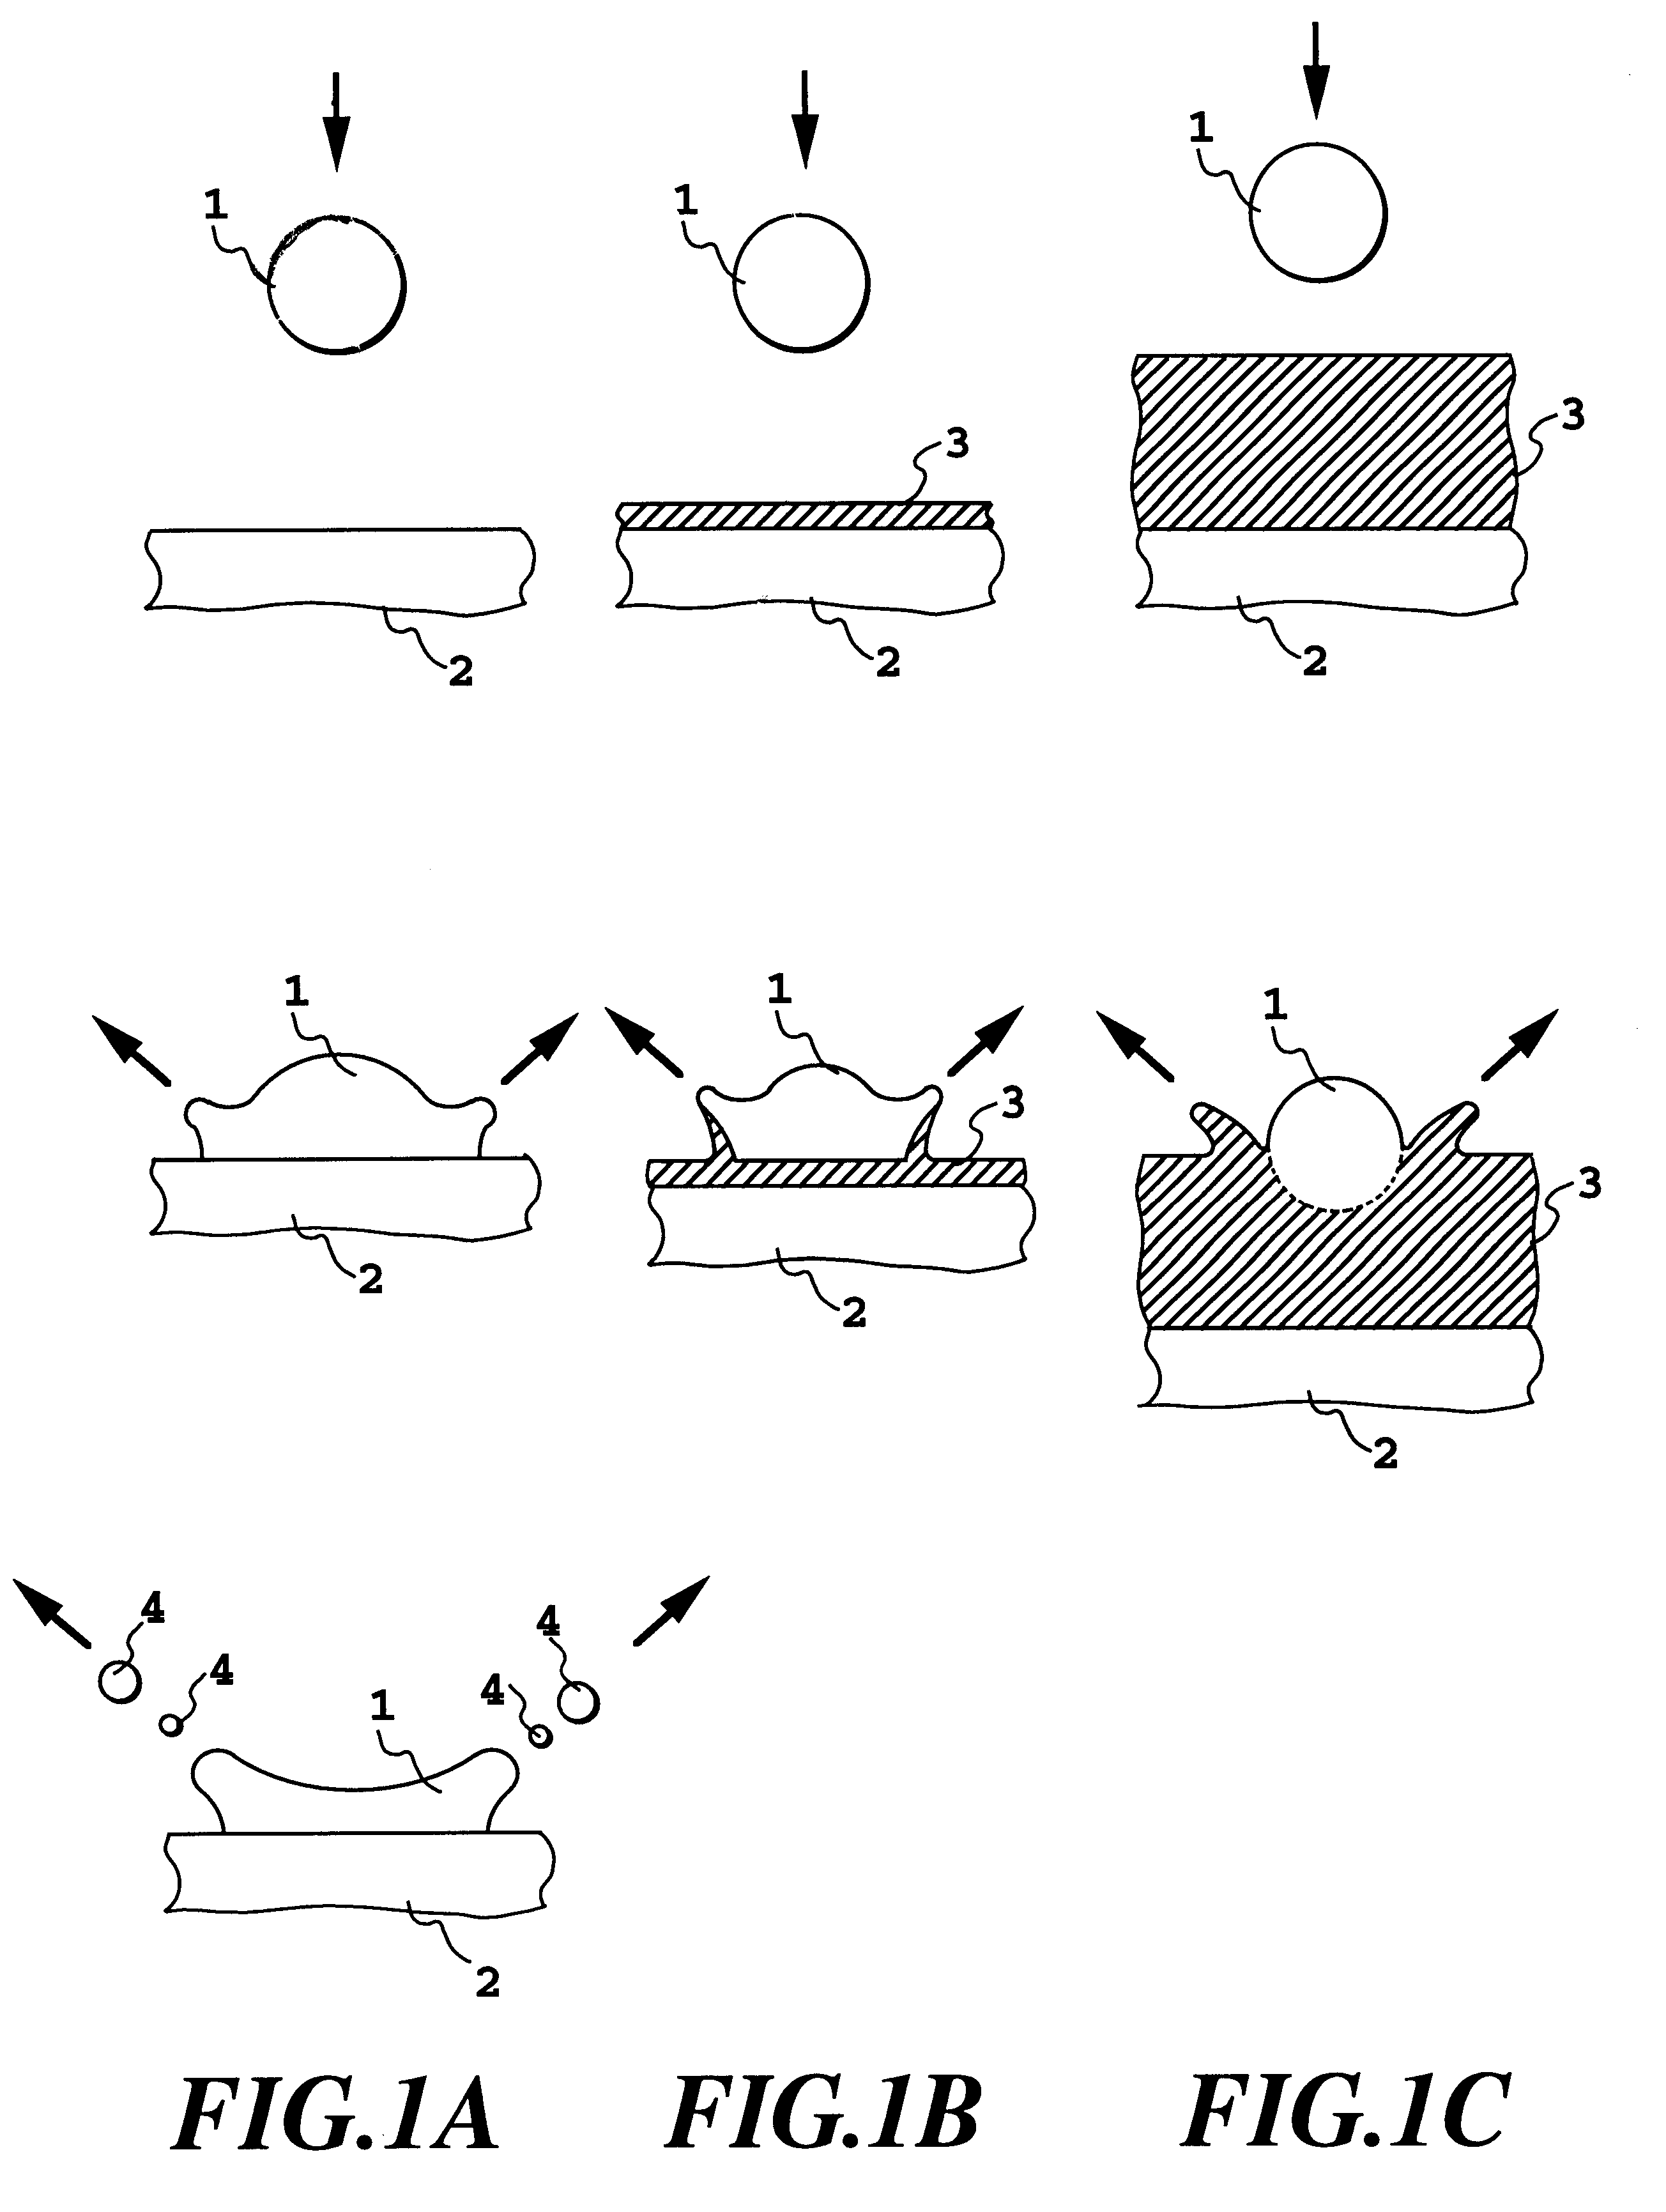 Liquid ejection apparatus using air flow to remove mist